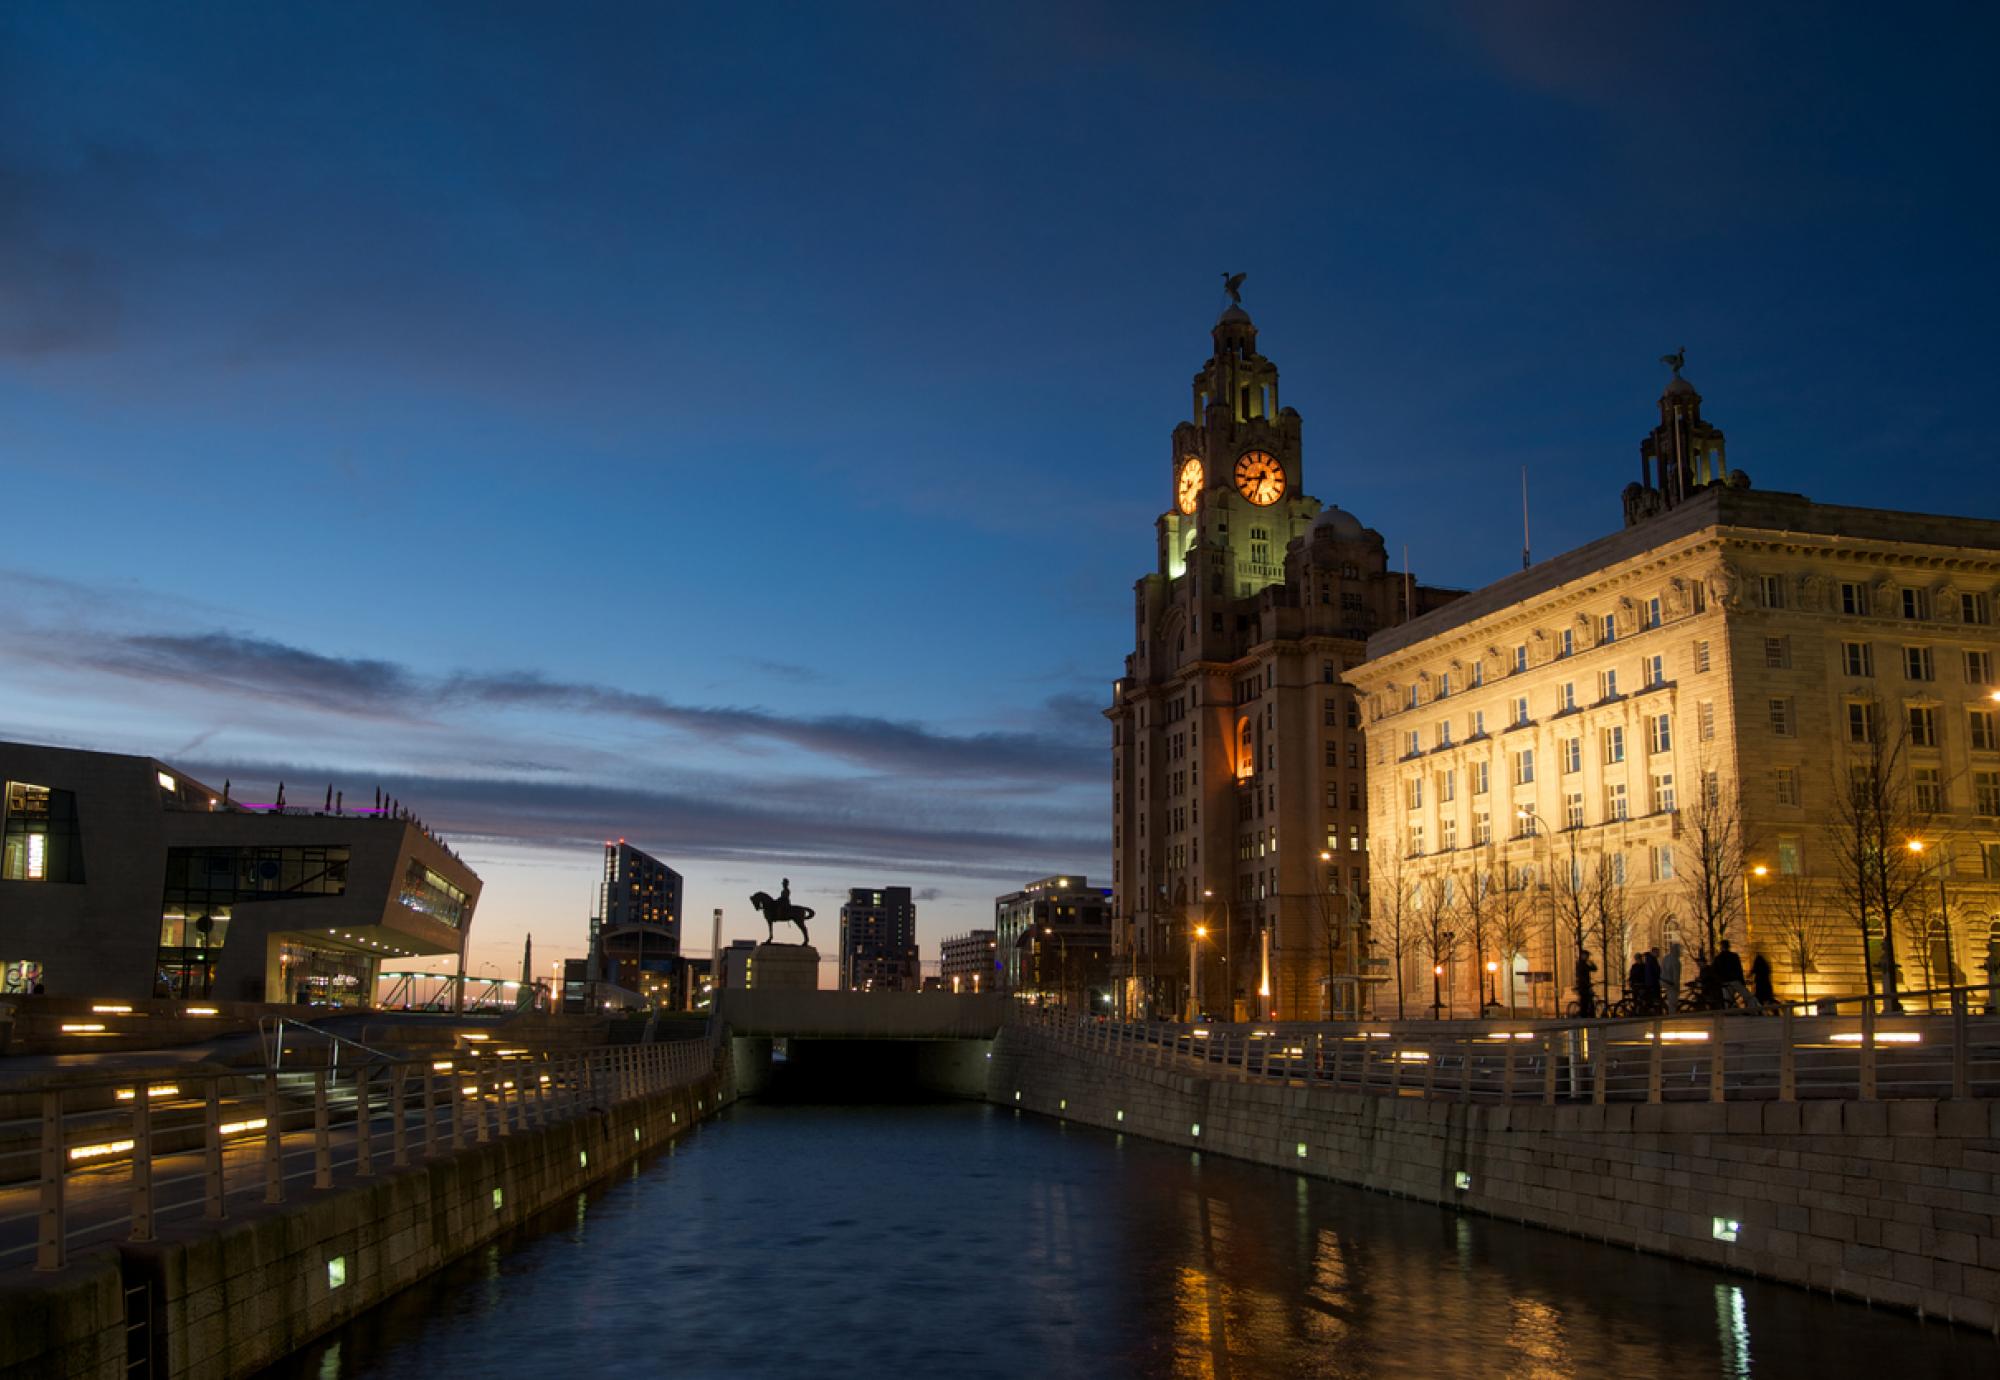 Liver building at night